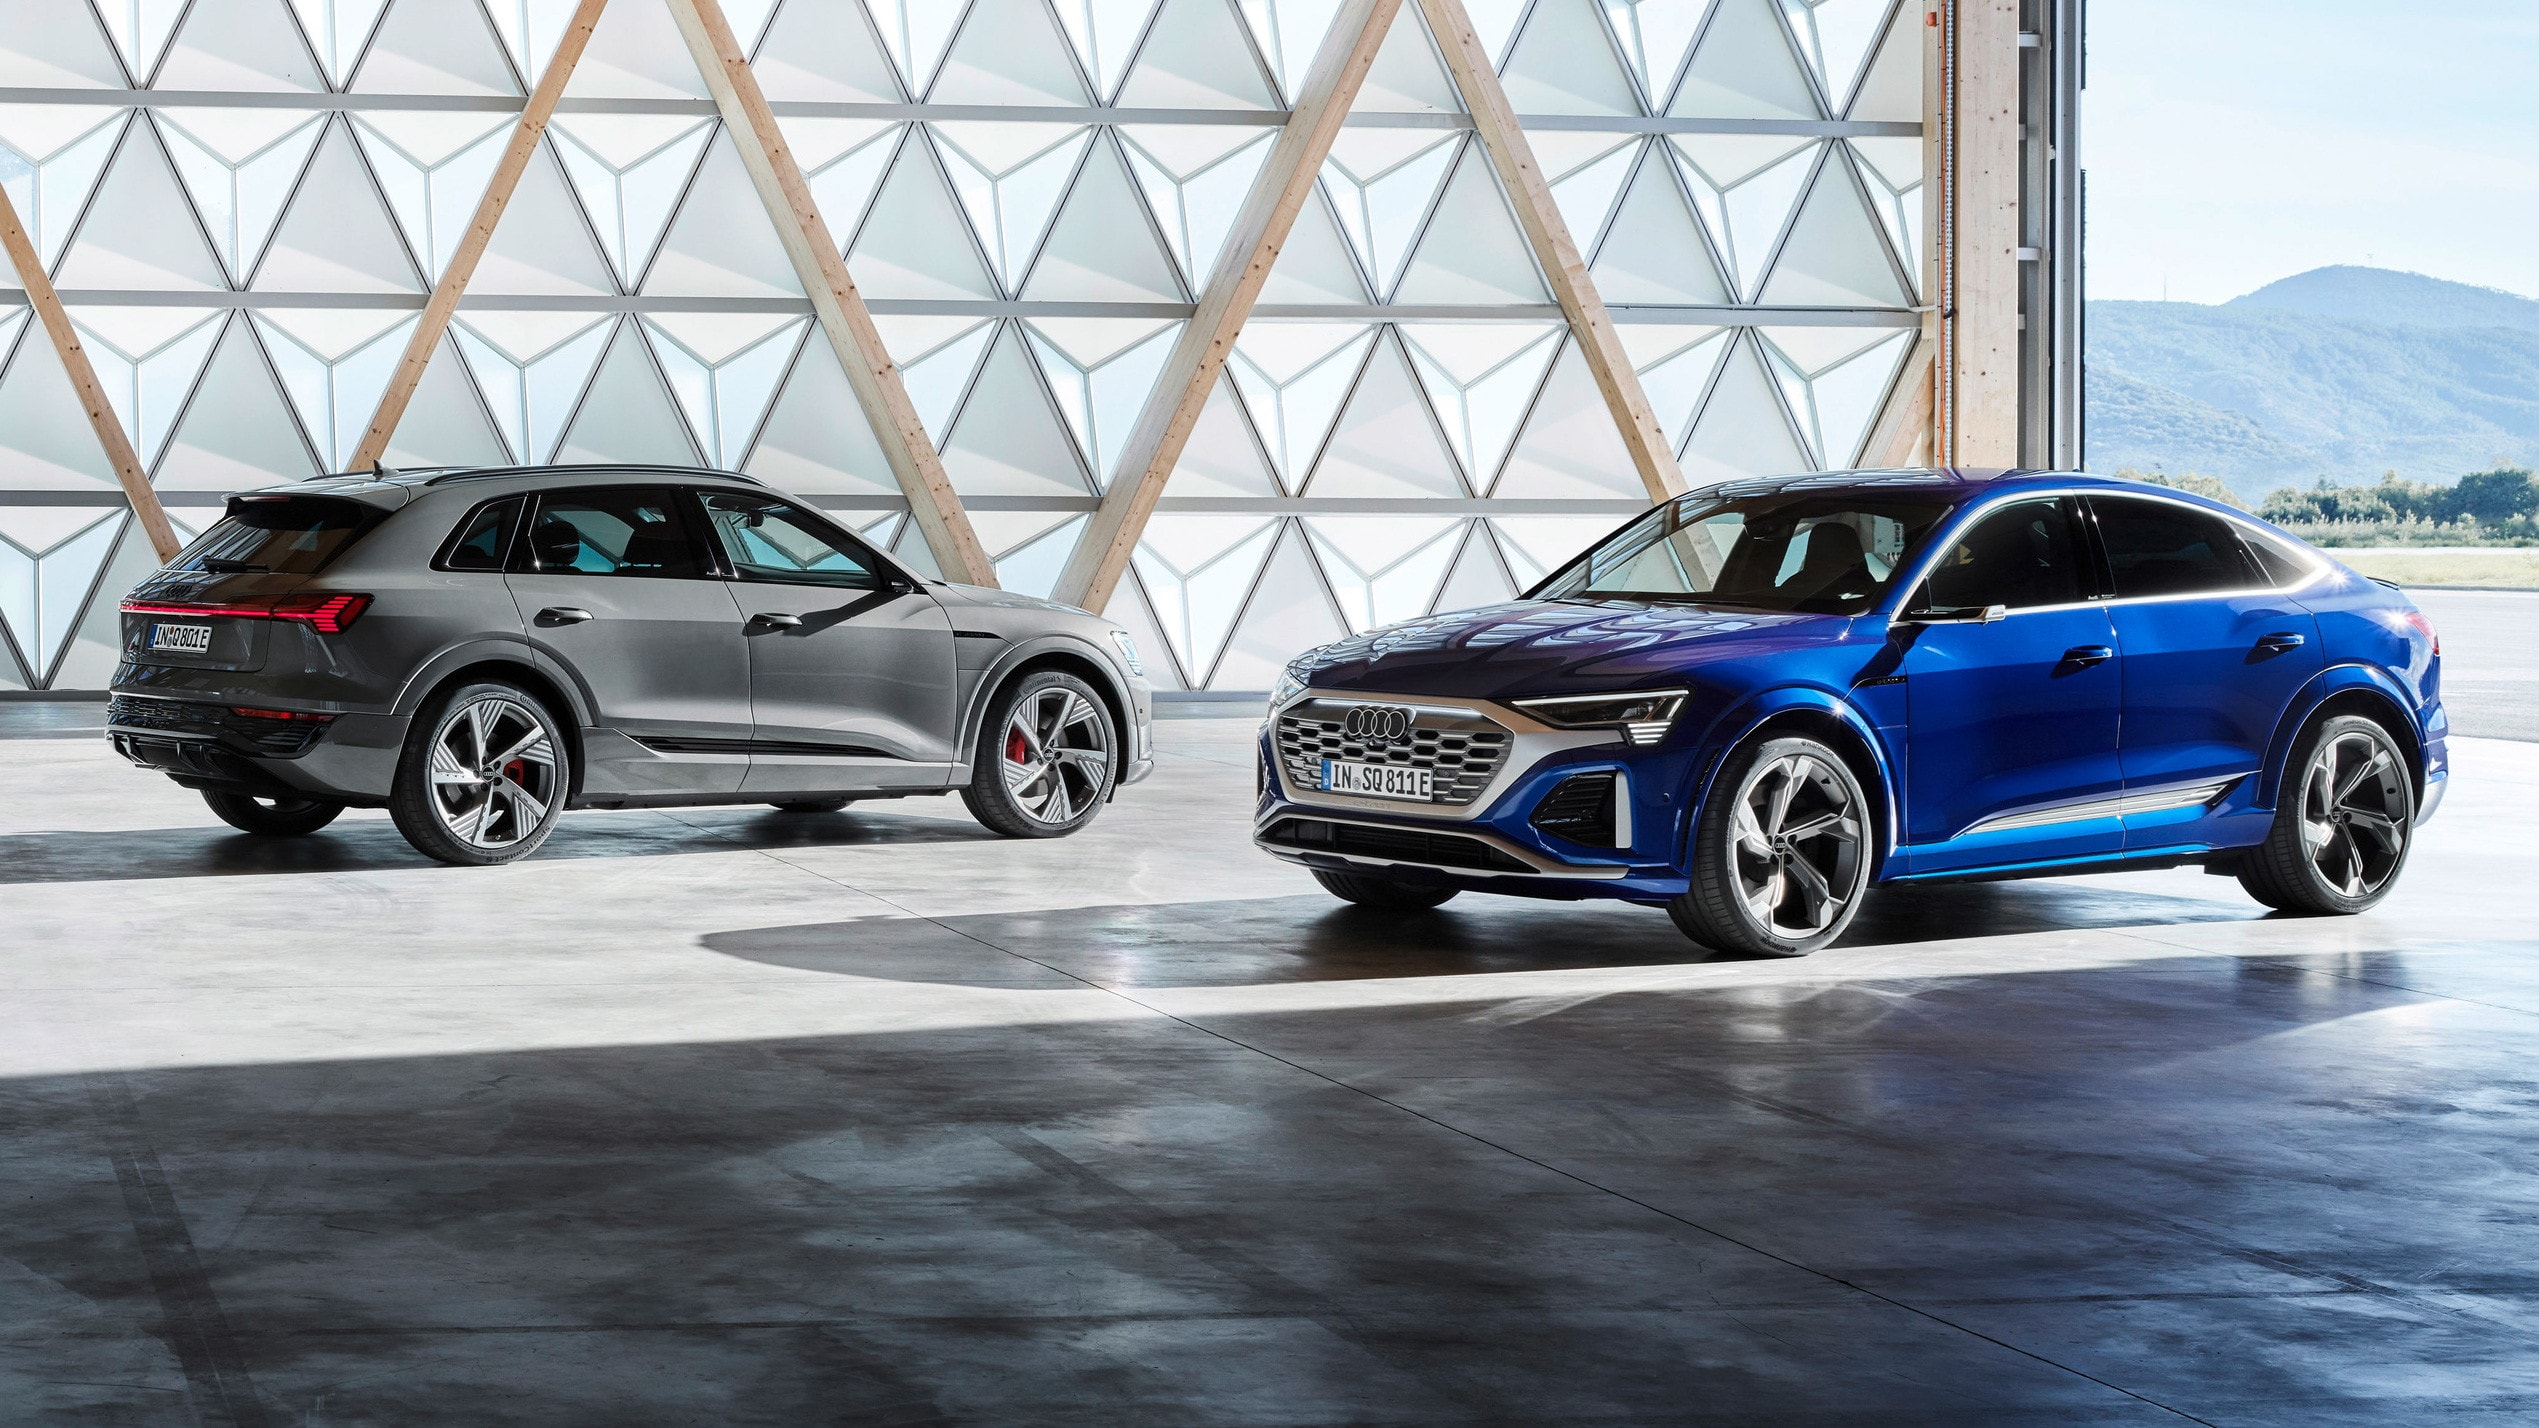 https://s1.cdn.autoevolution.com/images/news/pay-for-your-2023-audi-q8-e-tron-today-take-delivery-next-april-203780_1.jpg